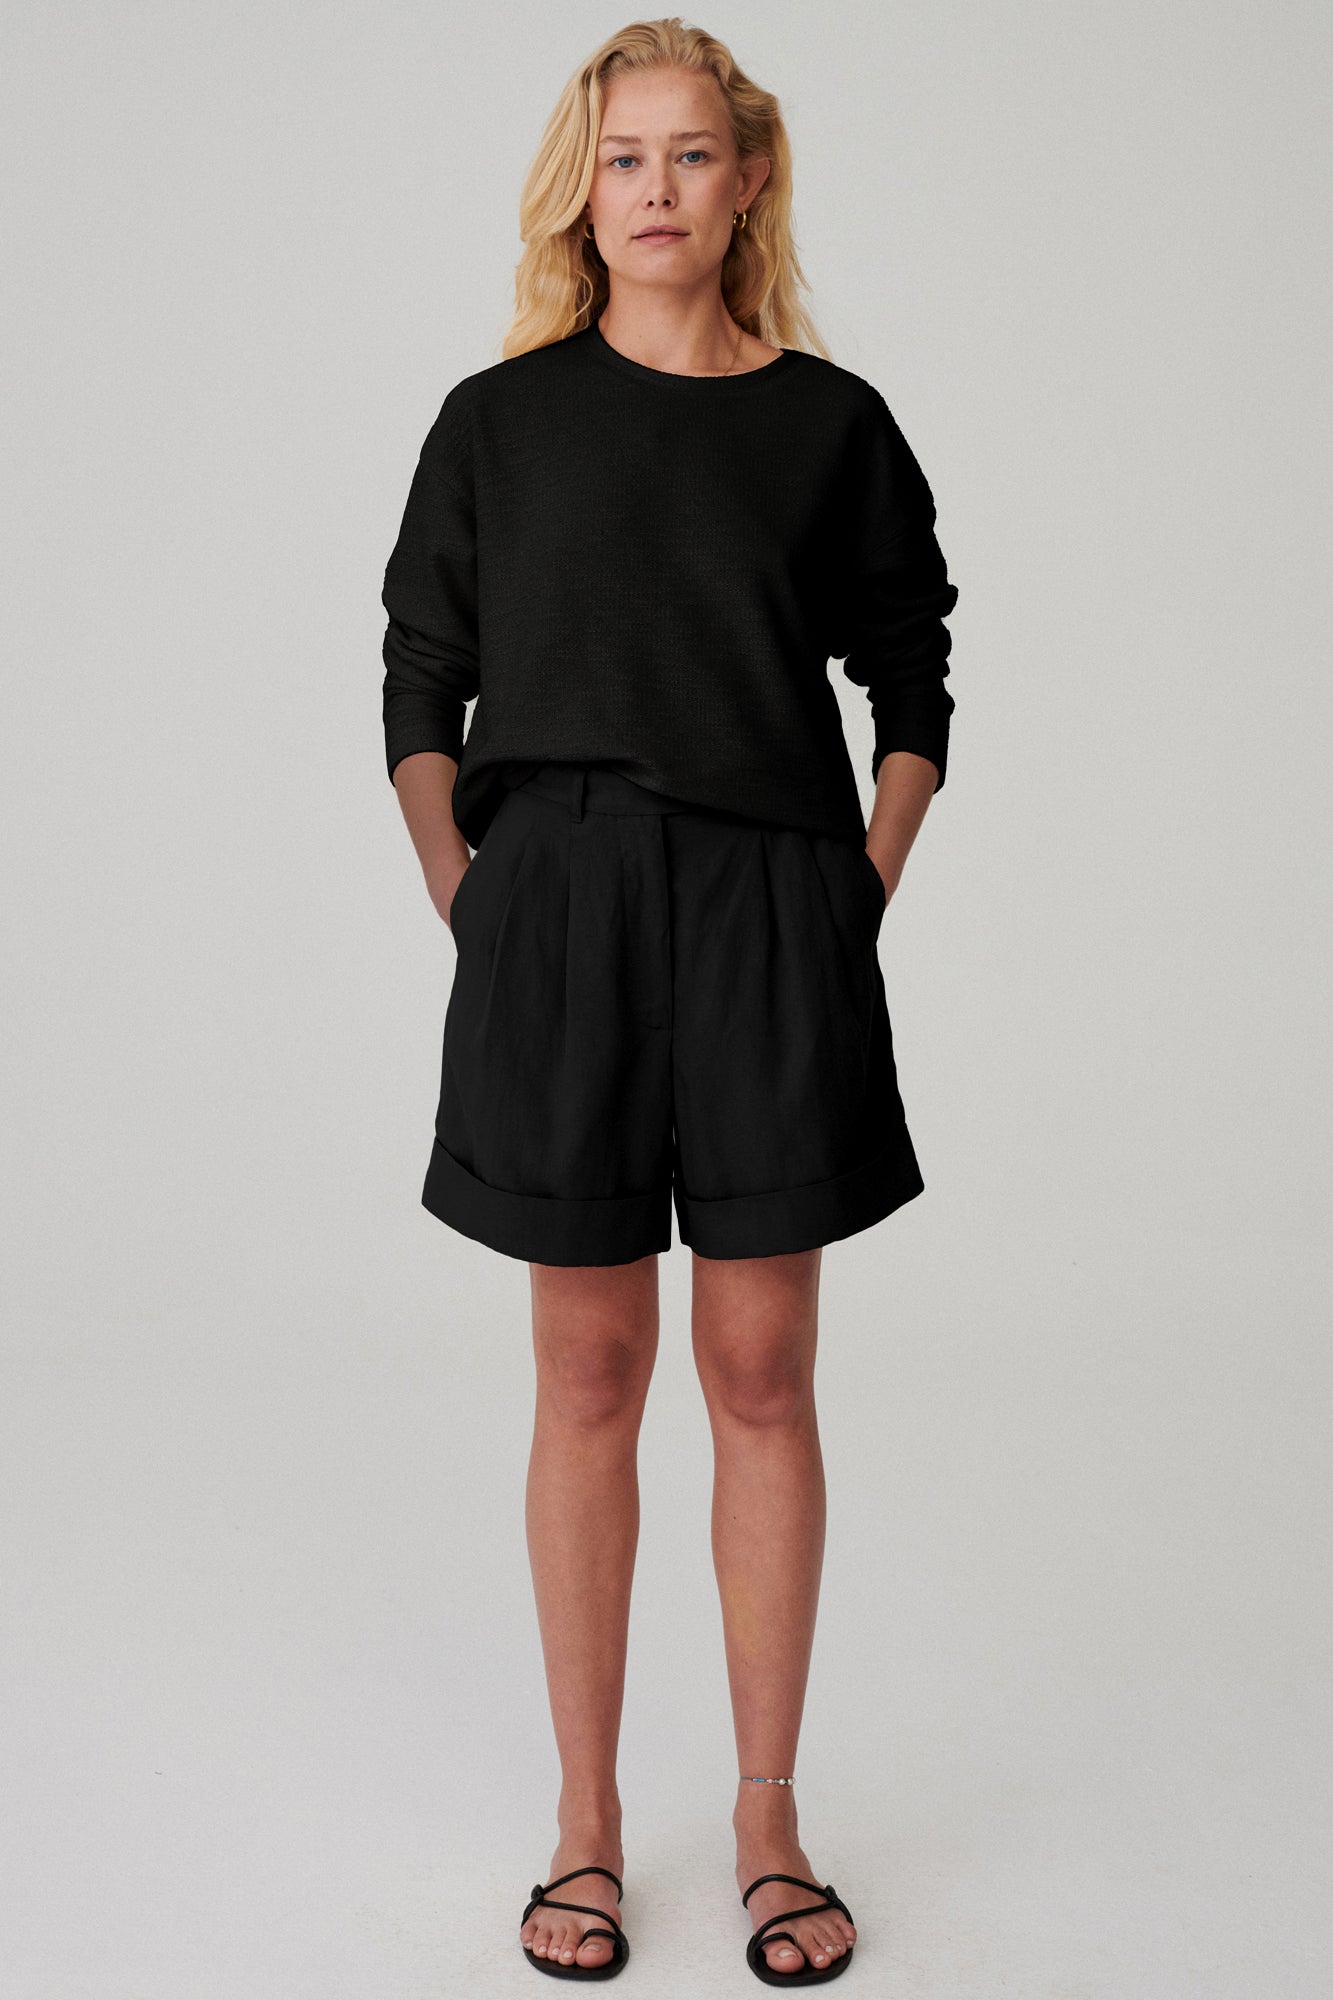 Sweatshirt in cotton / 14 / 04 / onyx black ?The model is 173 cm tall and wears size XS/S?